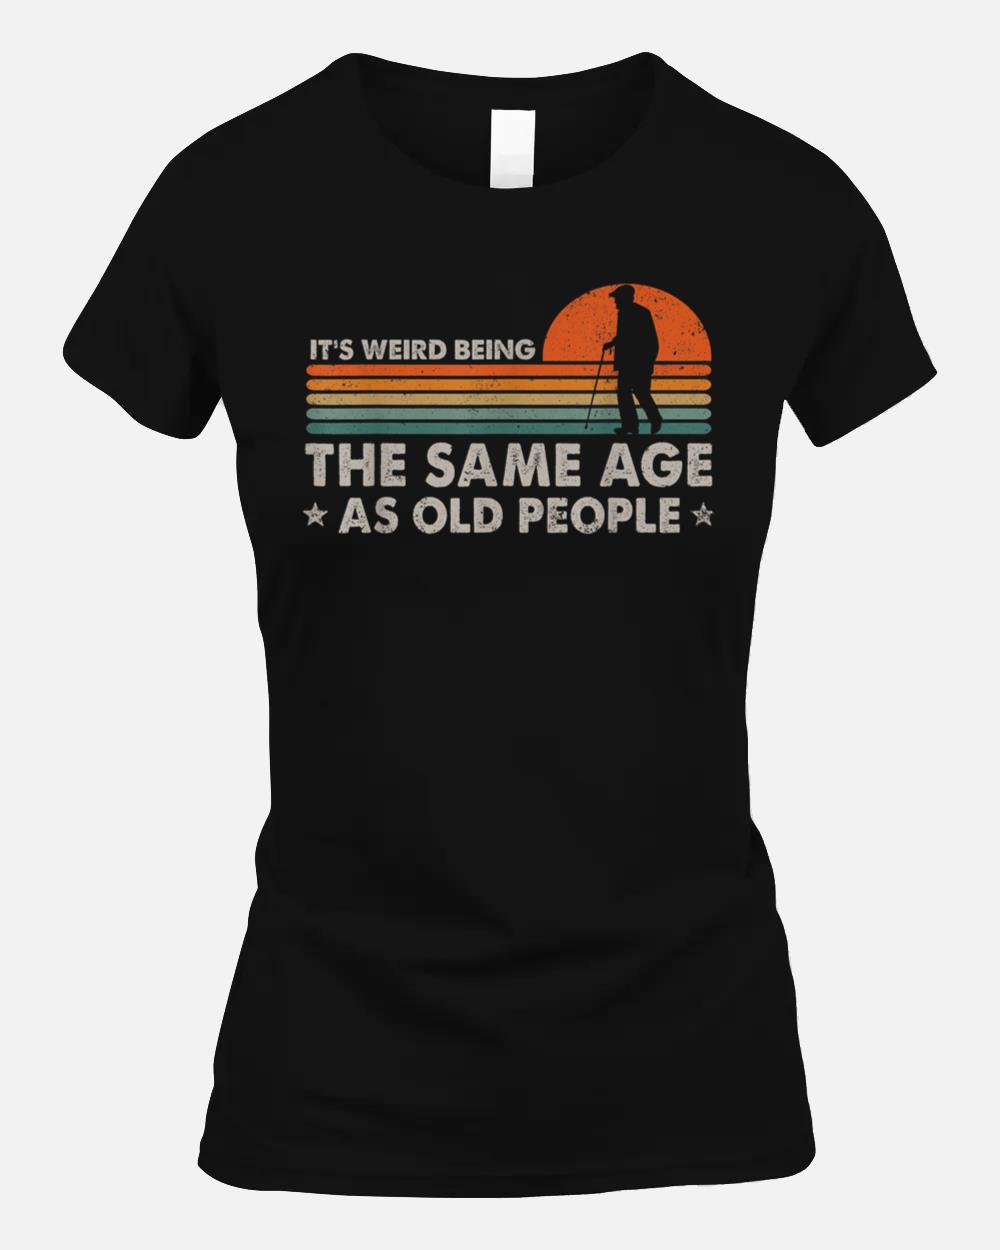 It's Weird Being The Same Age As Old People Funny Vintage_1 Unisex T-Shirt